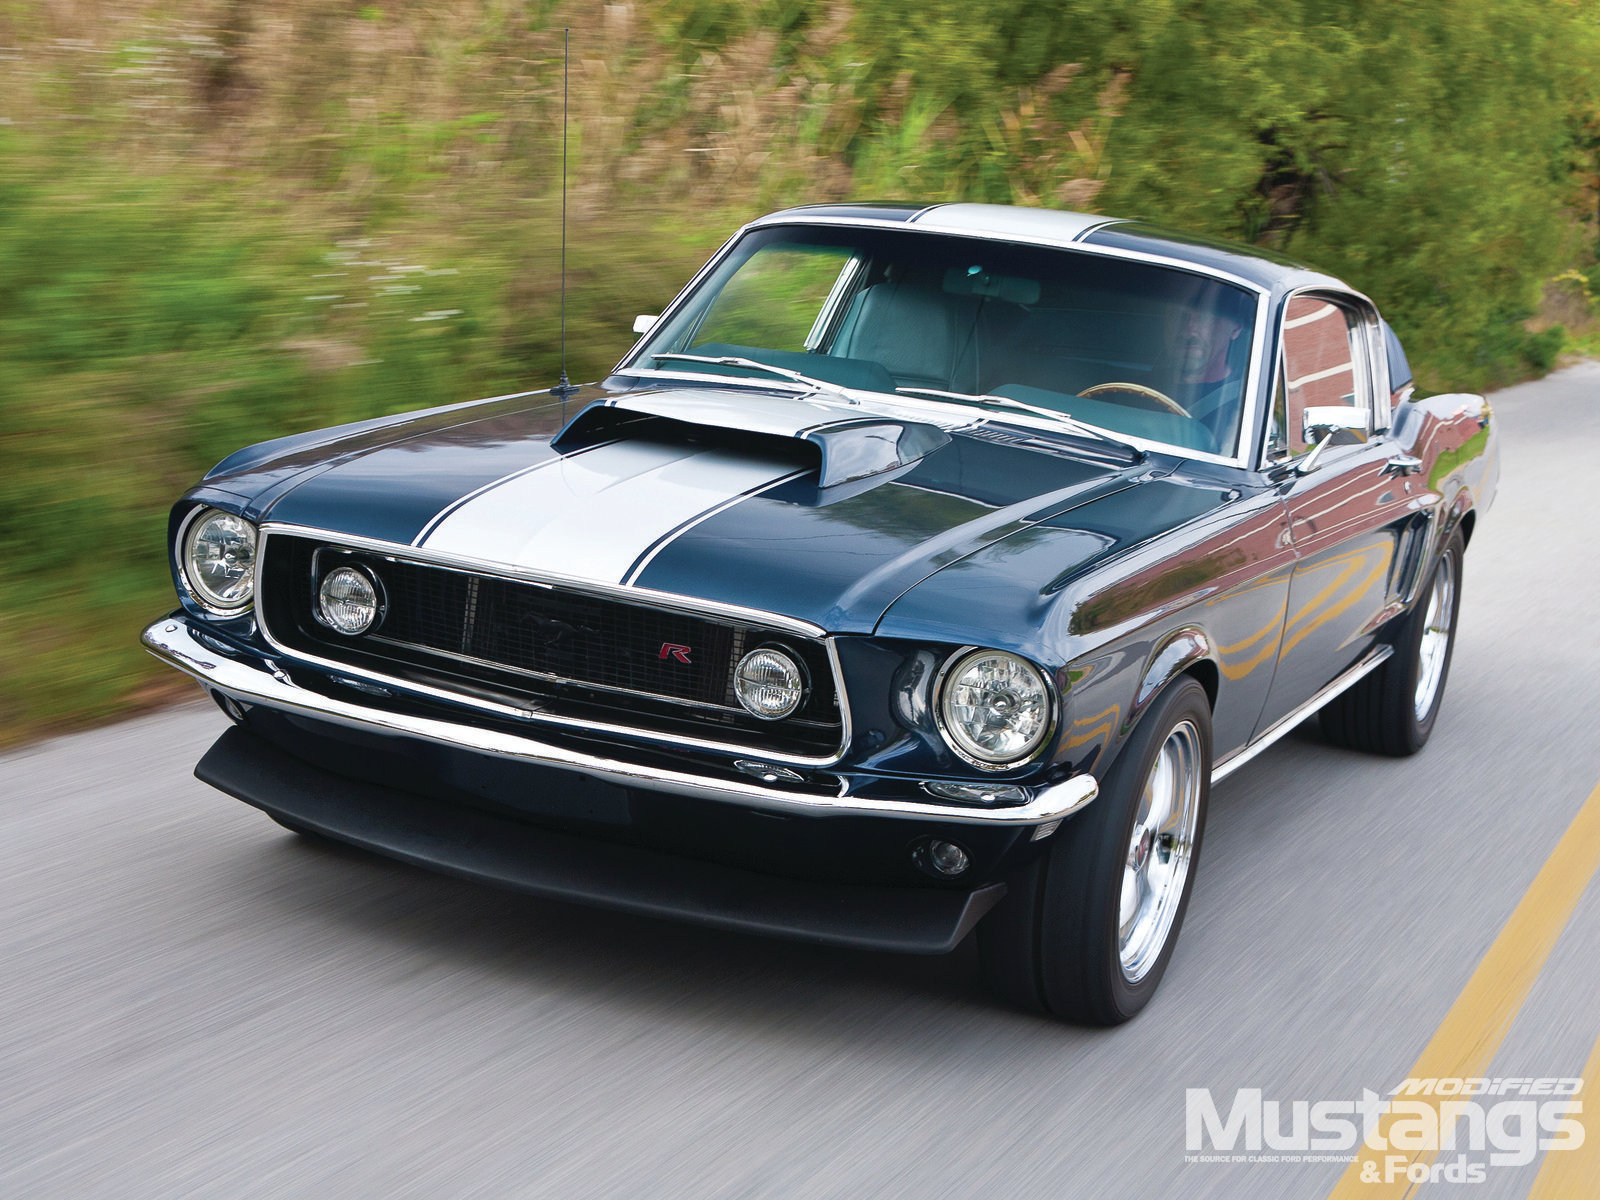 1968 Ford Mustang Backgrounds, Compatible - PC, Mobile, Gadgets| 1600x1200 px